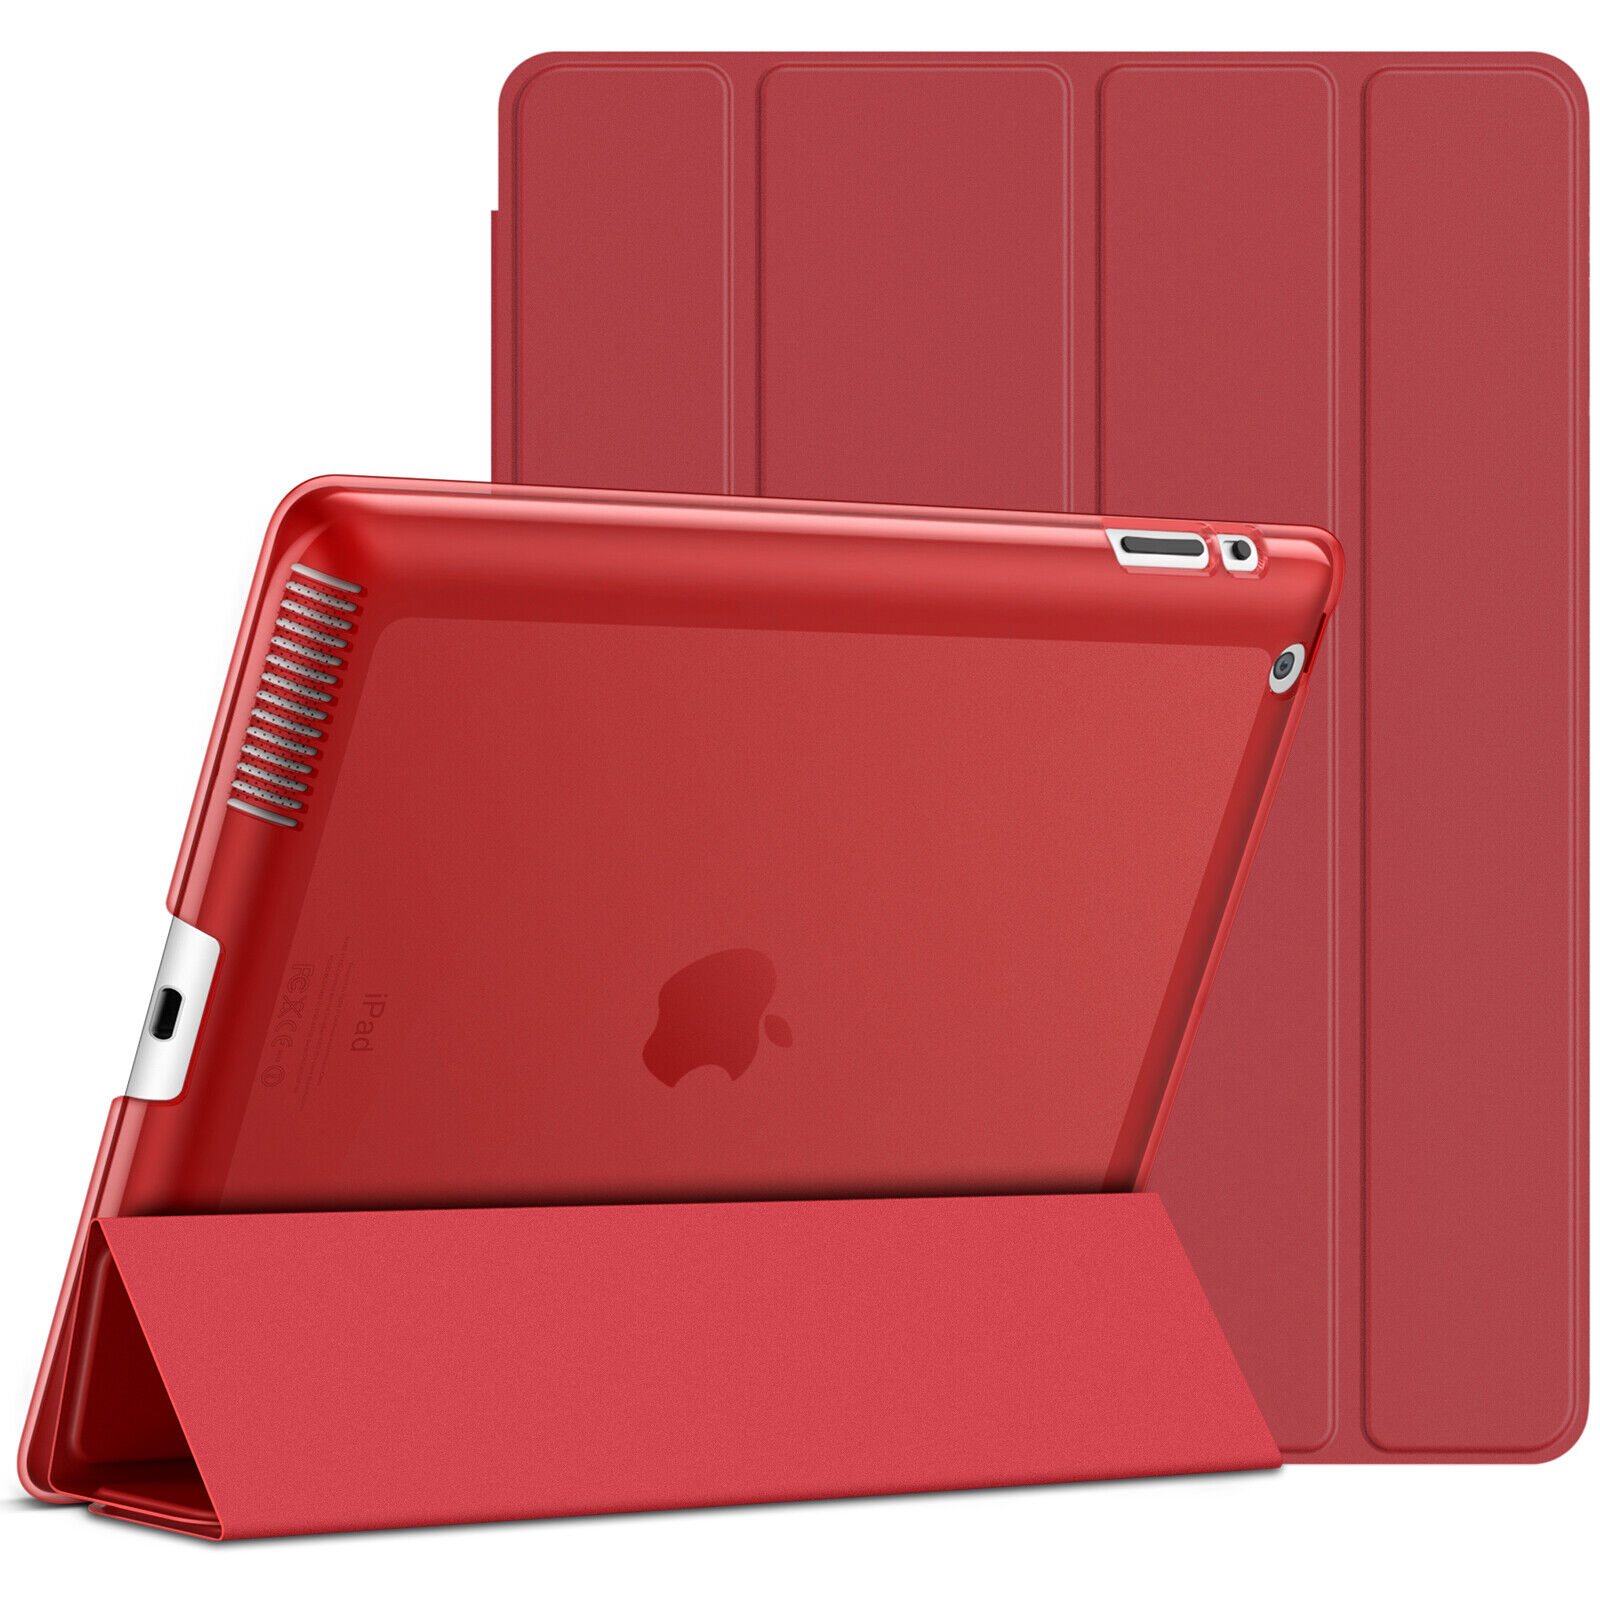 JETech Case for iPad 2 3 4 (Old Versions) Smart Case Cover with Auto Sleep/Wake